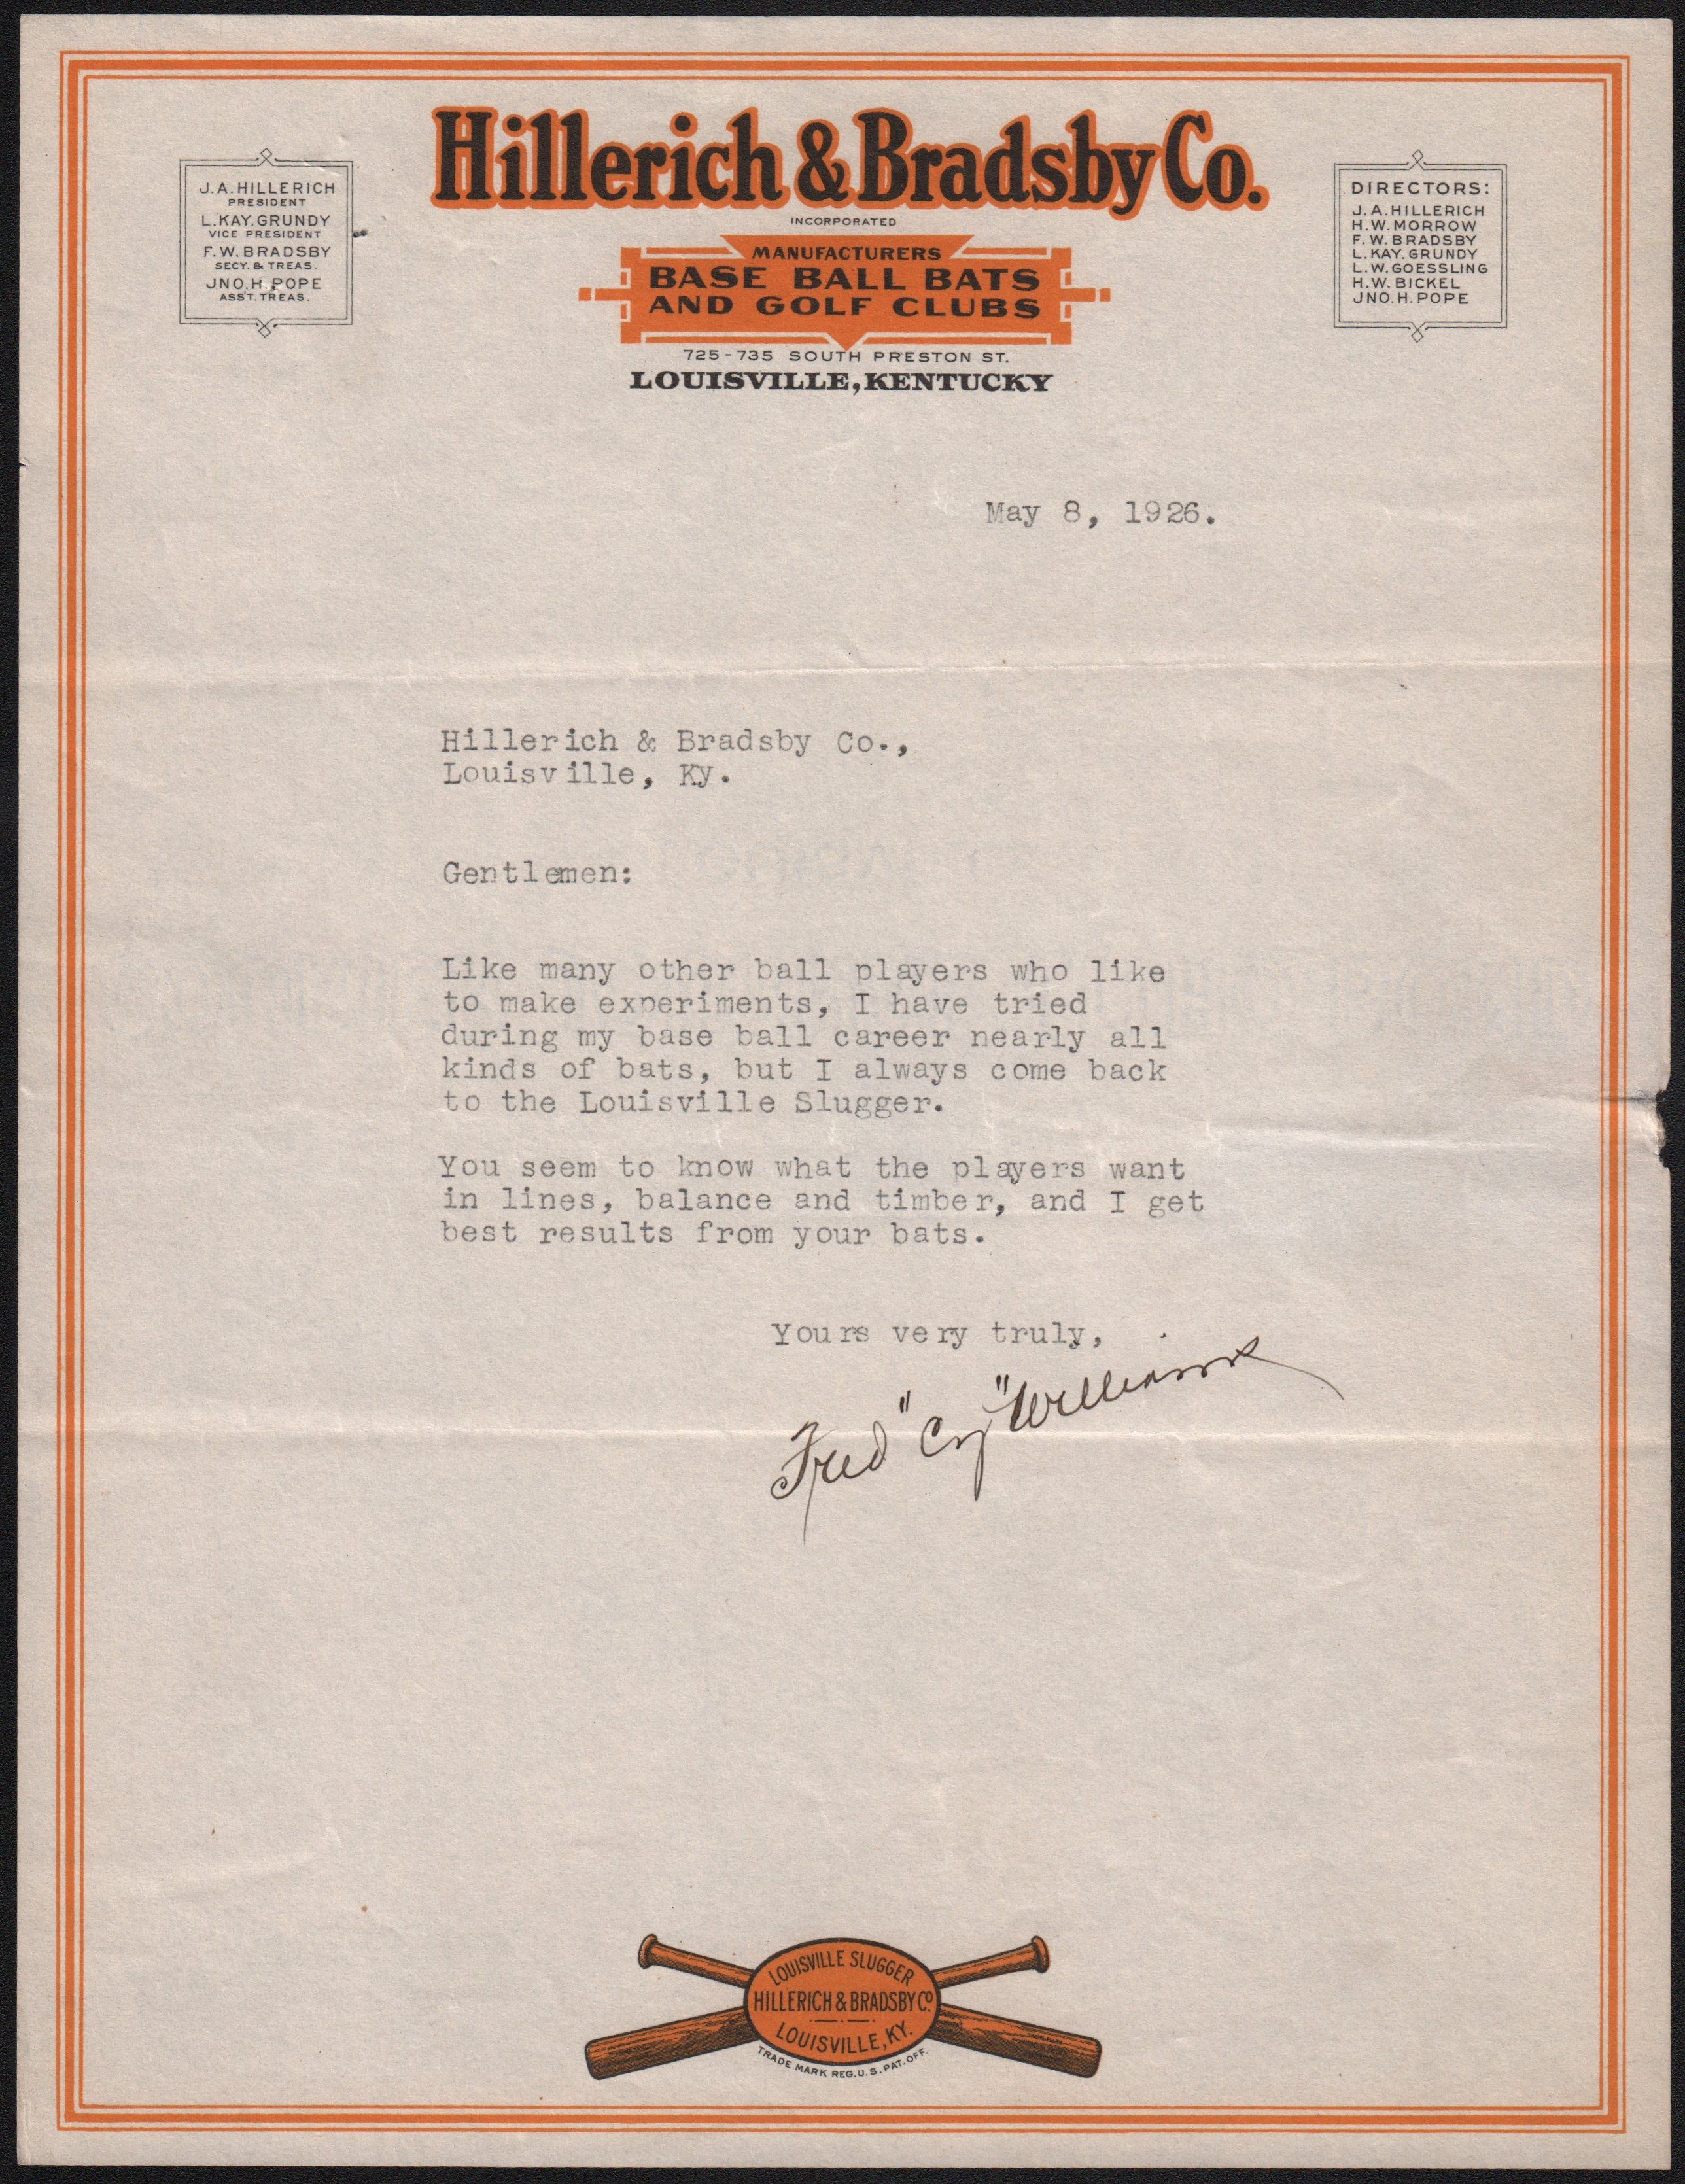 Baseball Autographs - 1926 Fred Cy Williams Hillerich & Bradsby Letter Endorsing Bats